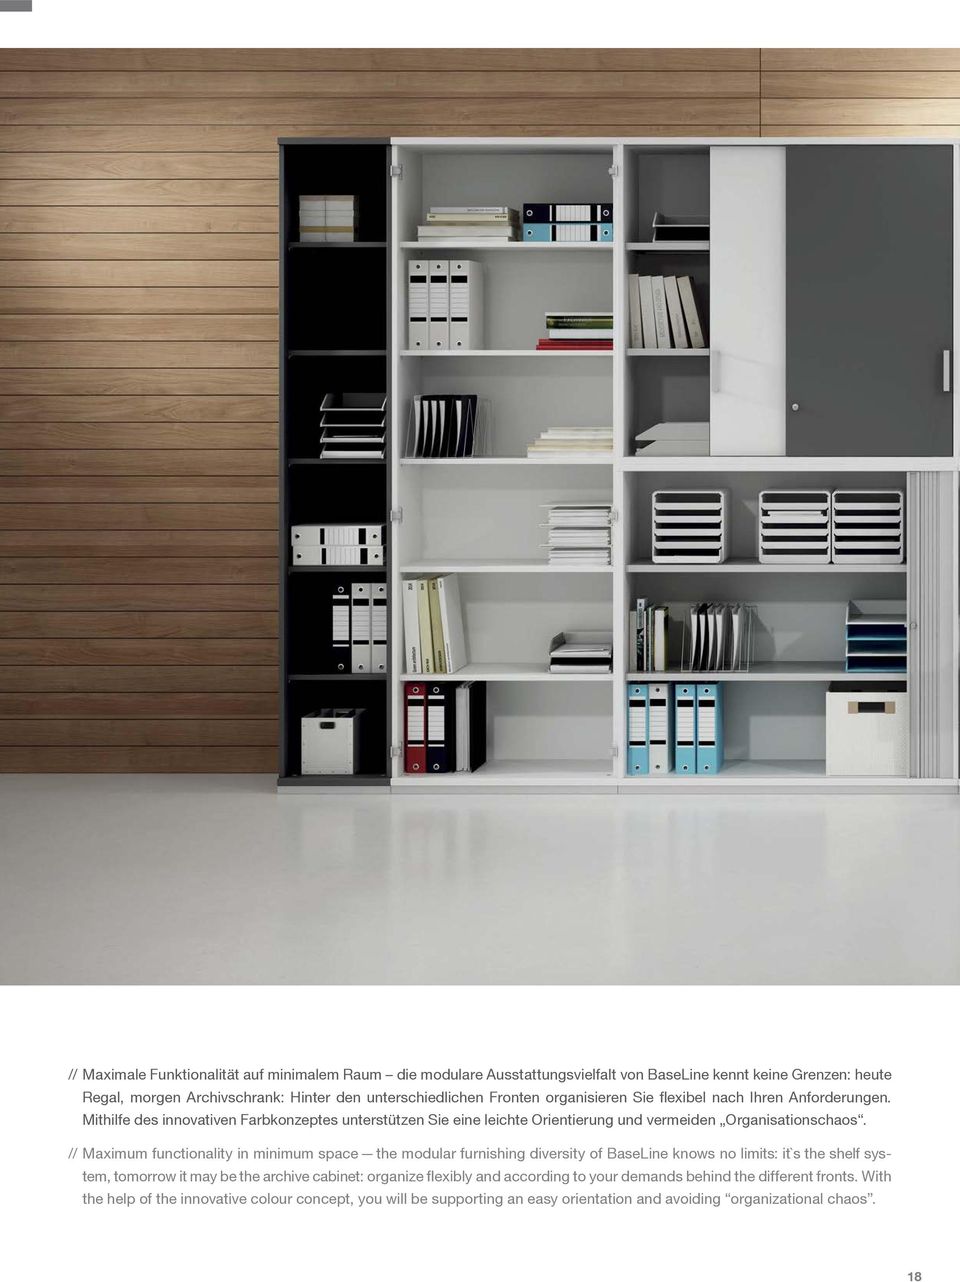 // Maximum functionality in minimum space the modular furnishing diversity of BaseLine knows no limits: it`s the shelf system, tomorrow it may be the archive cabinet: organize